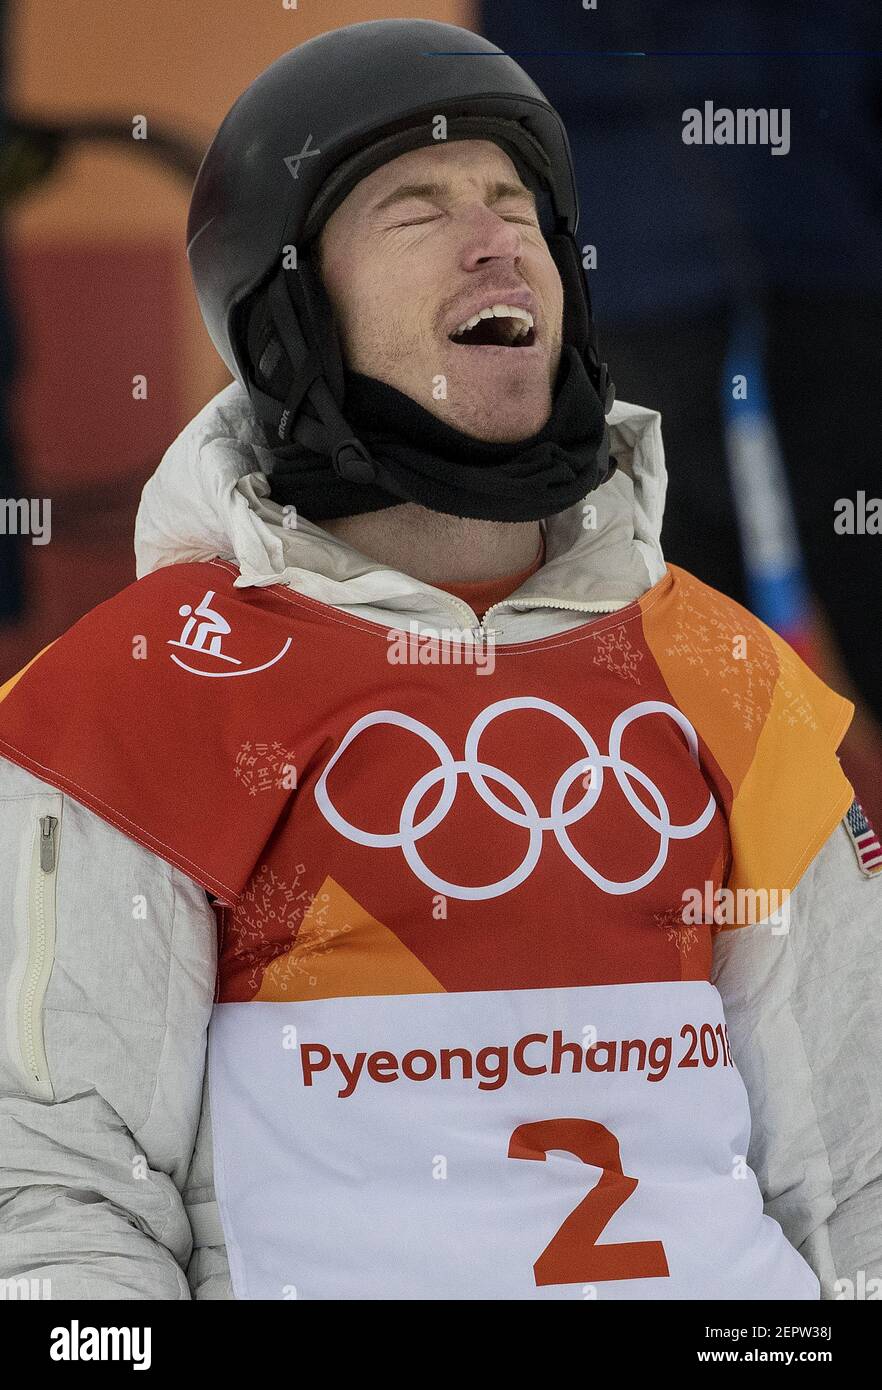 Shaun White of the USA reacts after his final run during the Men's Half Pipe Snowboard finals at Phoenix Park in South Korea on Wednesday, Feb. 14, 2018, 2018, during the Pyeongchang Winter Olympics. (Photo by Carlos Gonzalez/Minneapolis Star Tribune/TNS/Sipa USA) Stock Photo